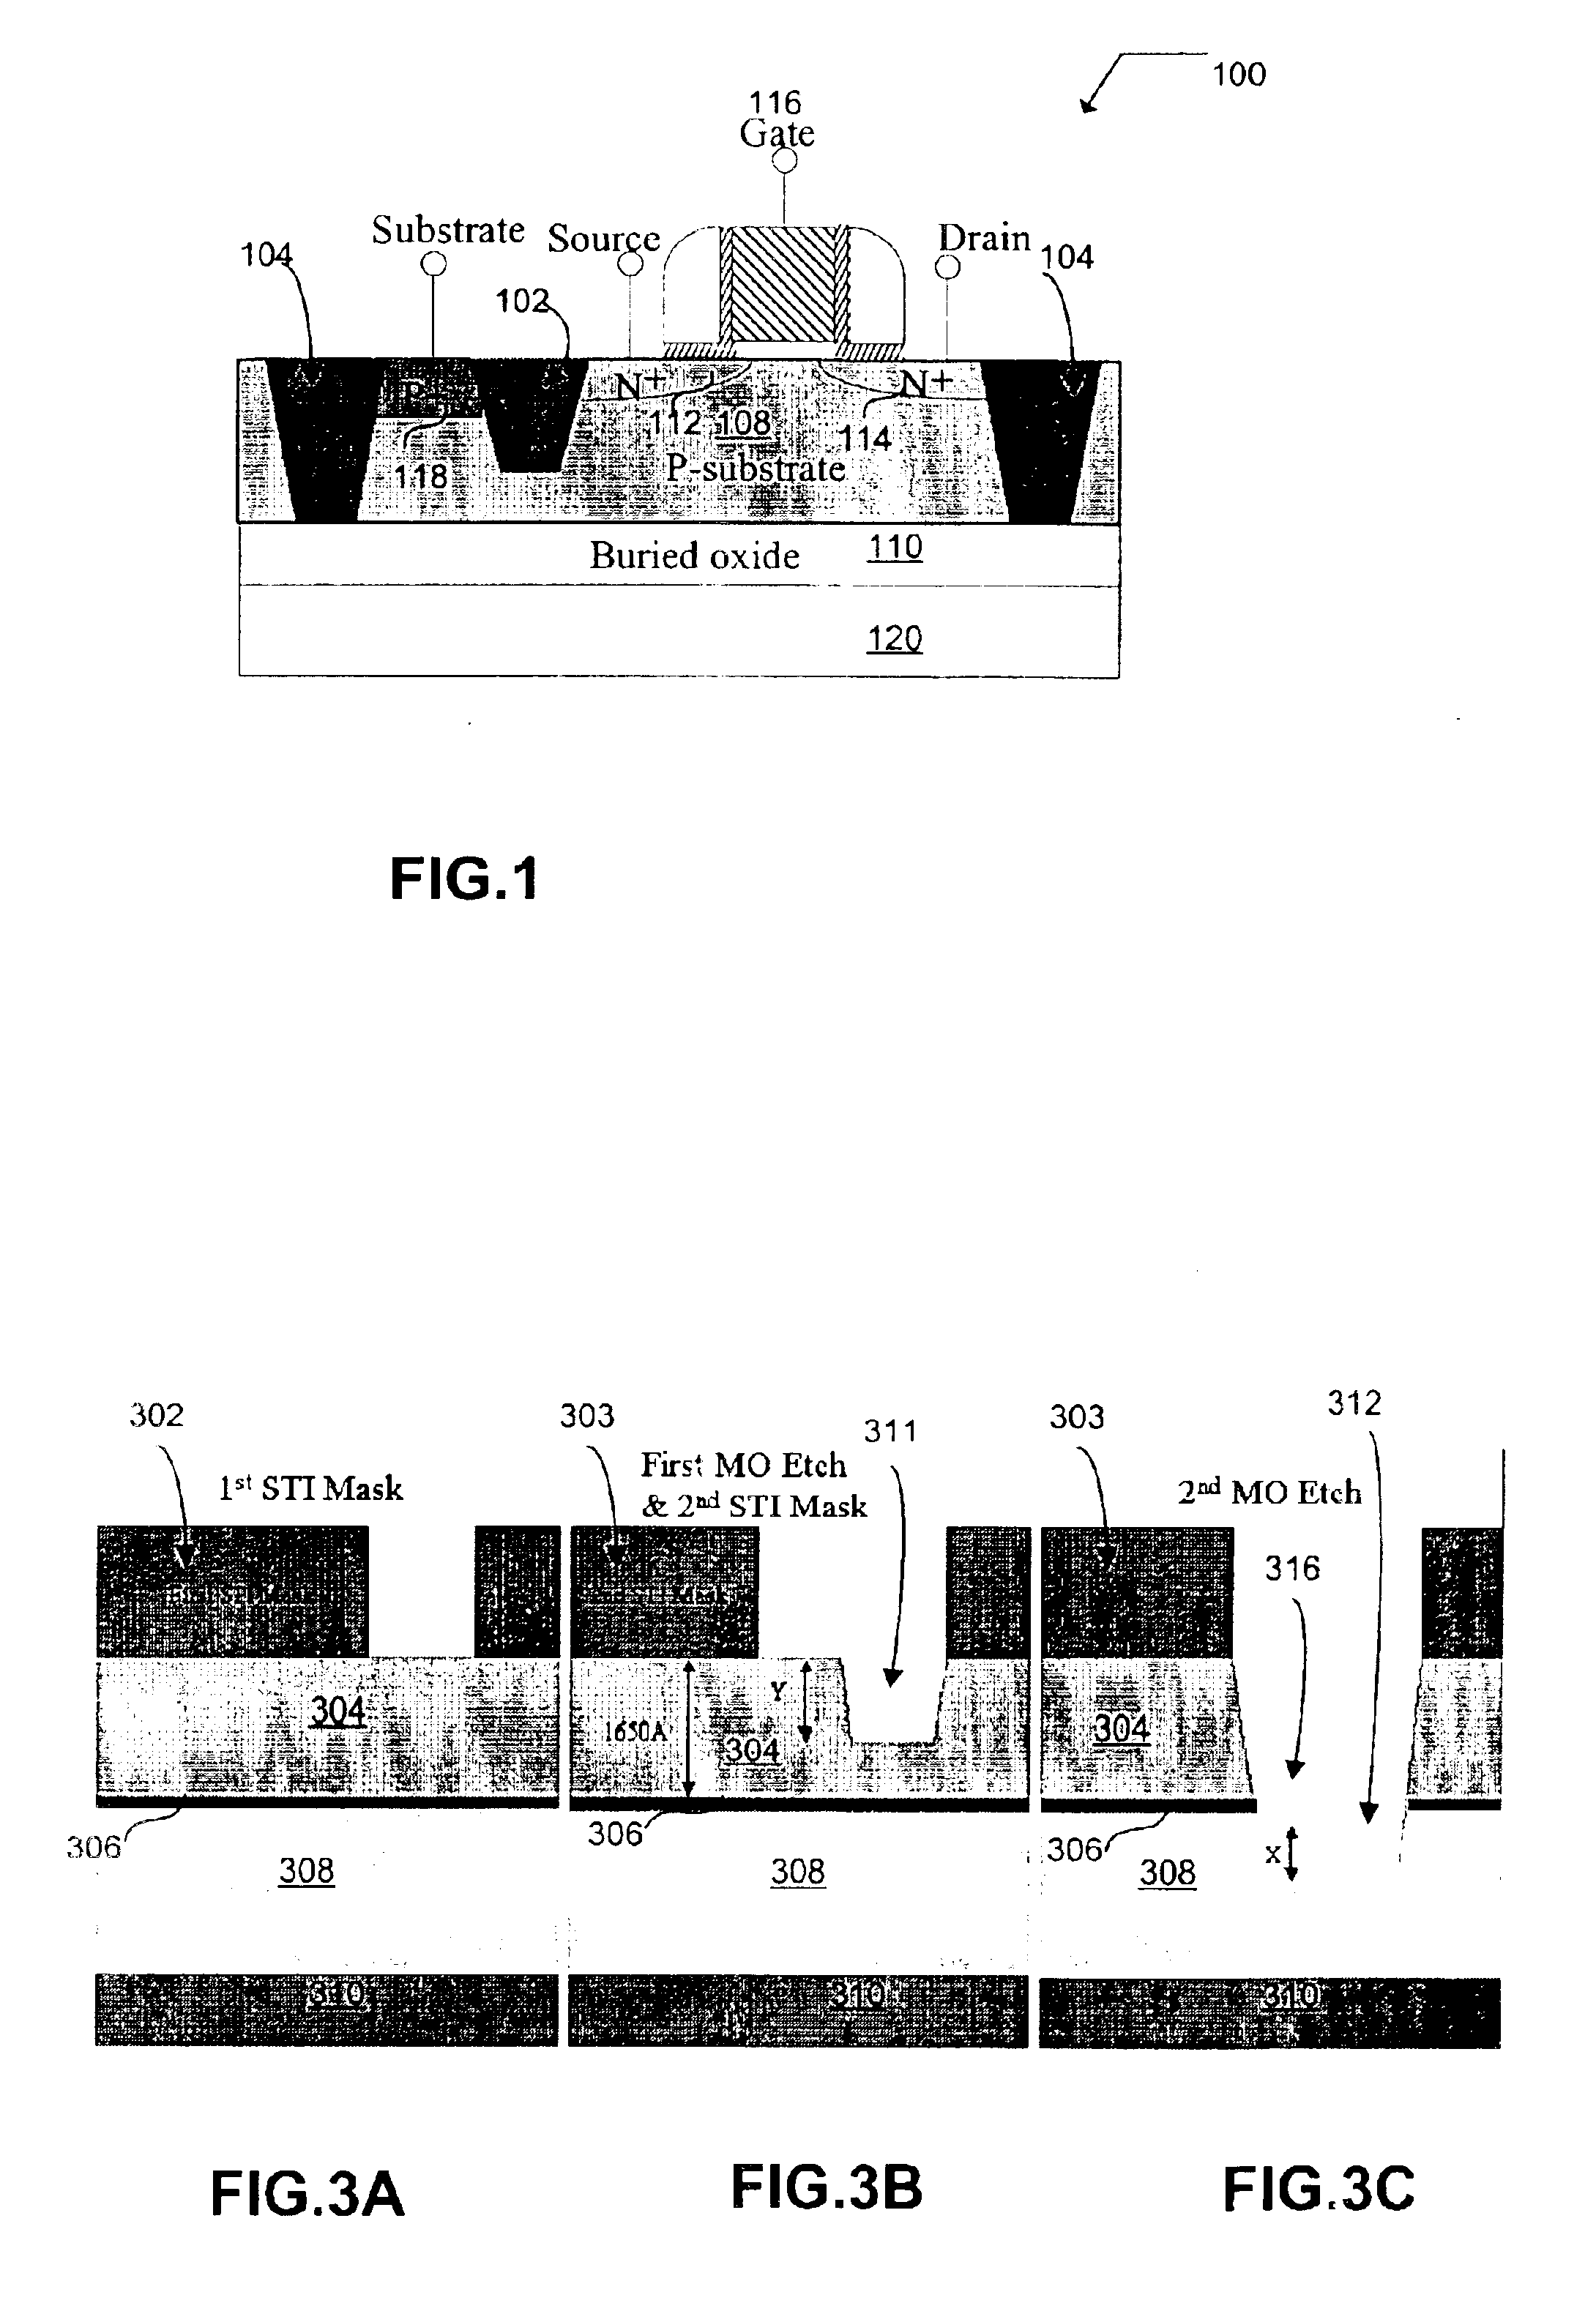 Fabrication of trenches with multiple depths on the same substrate